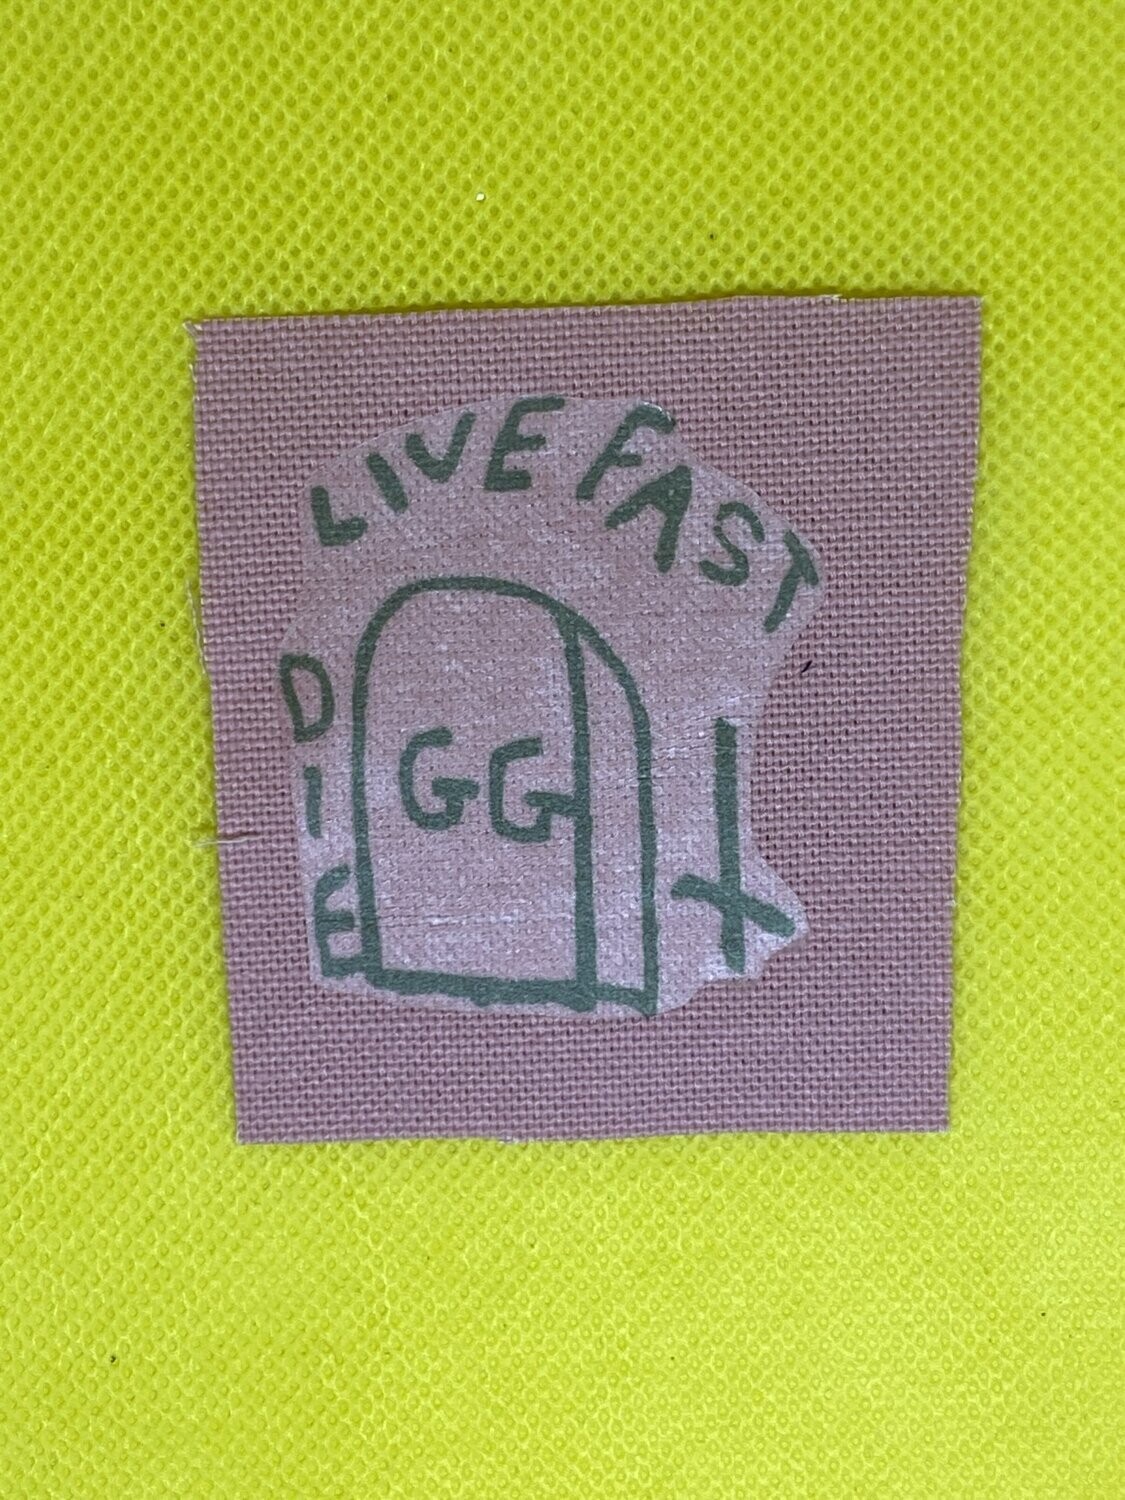 GG Allin Patch small